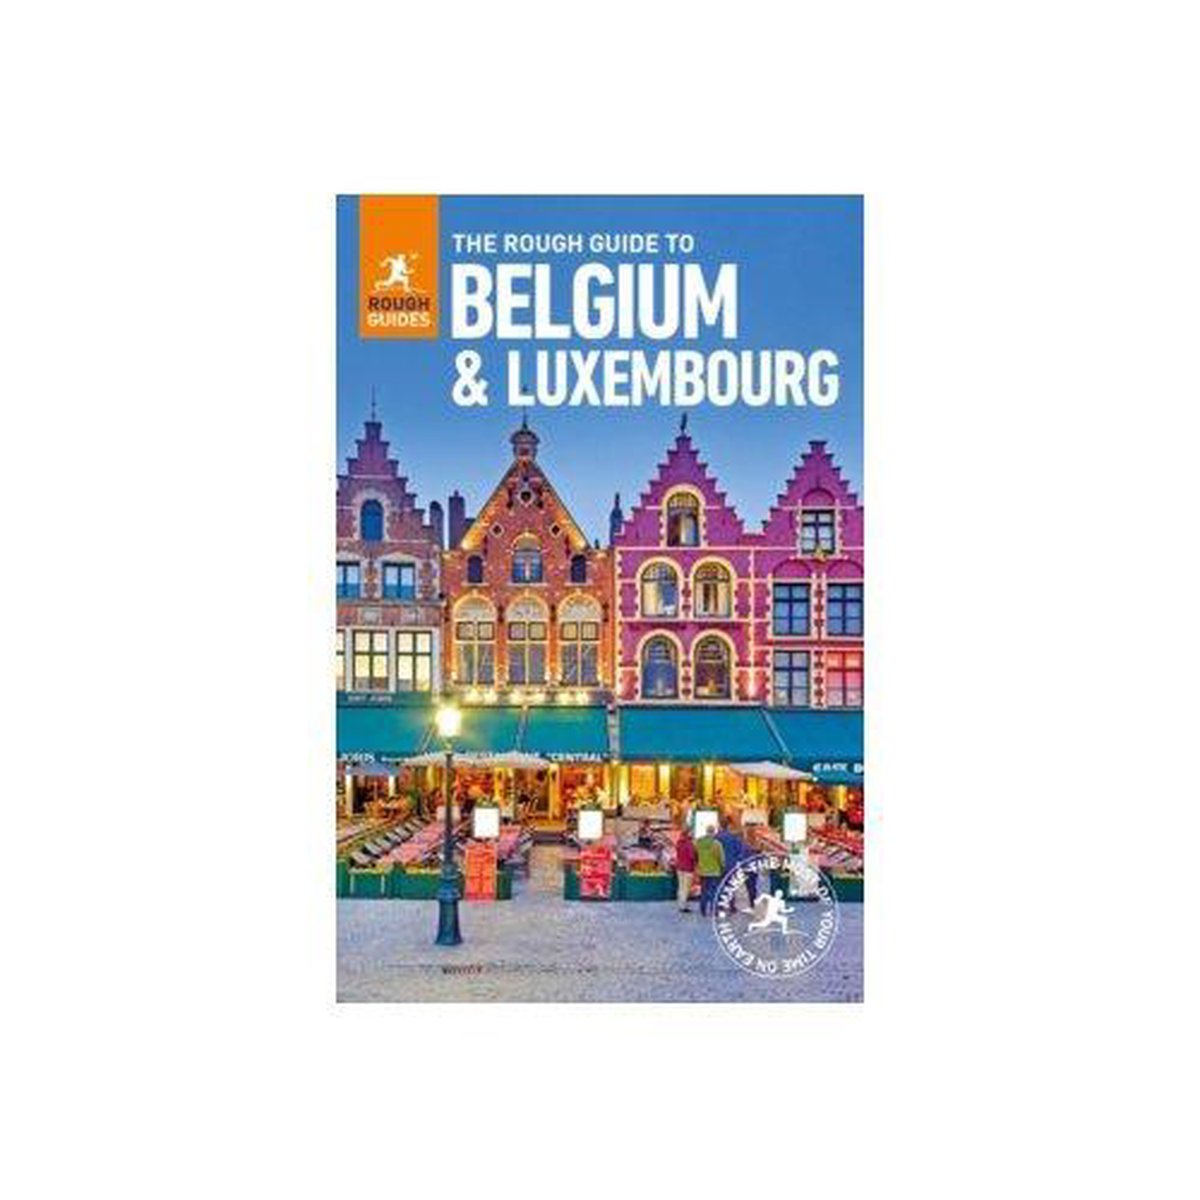 luxembourg travel guide book